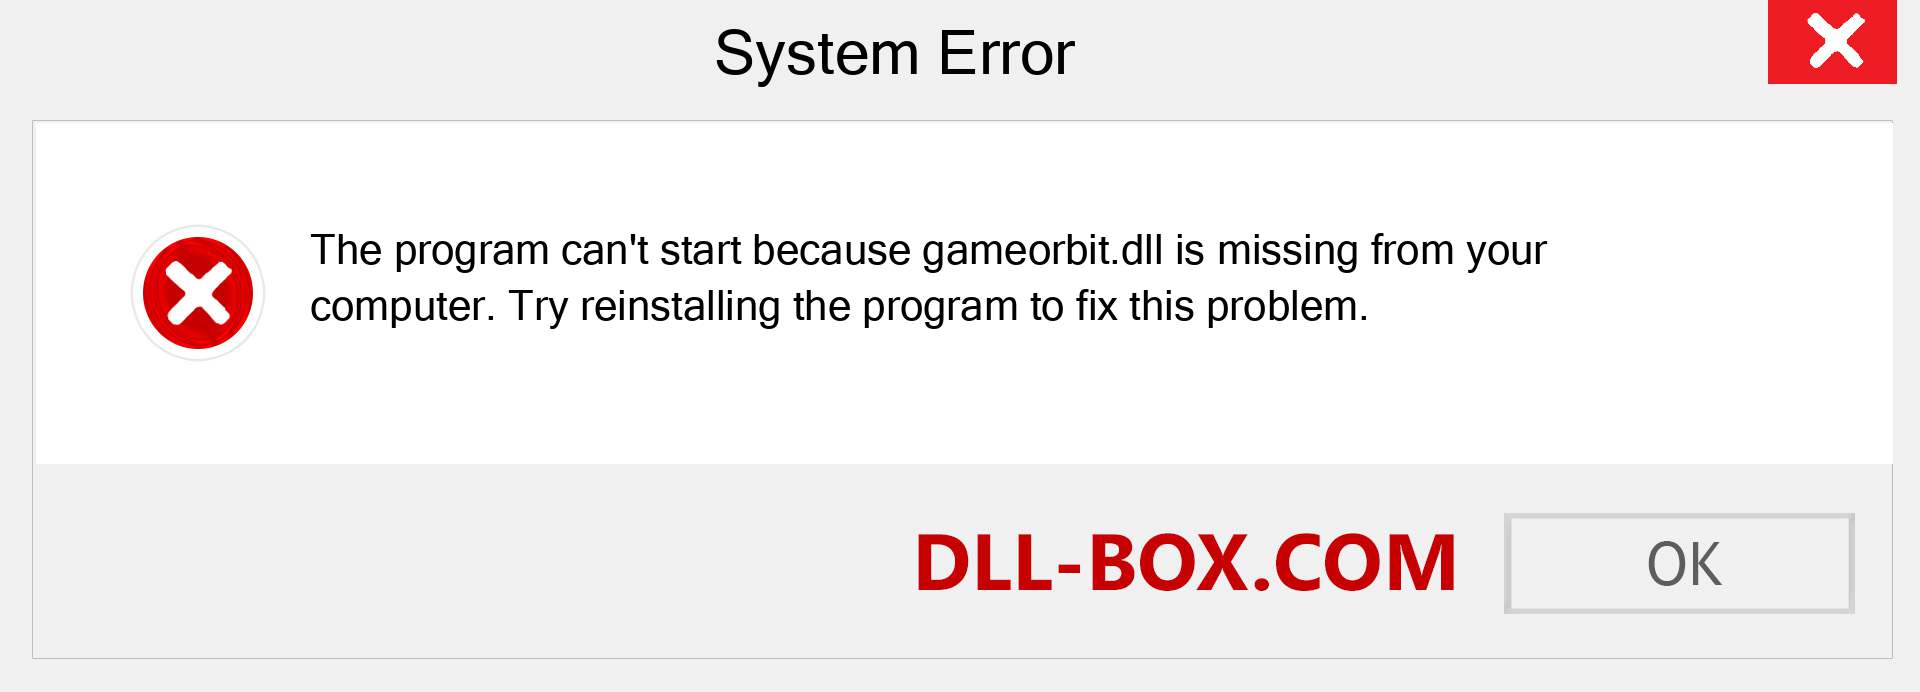  gameorbit.dll file is missing?. Download for Windows 7, 8, 10 - Fix  gameorbit dll Missing Error on Windows, photos, images